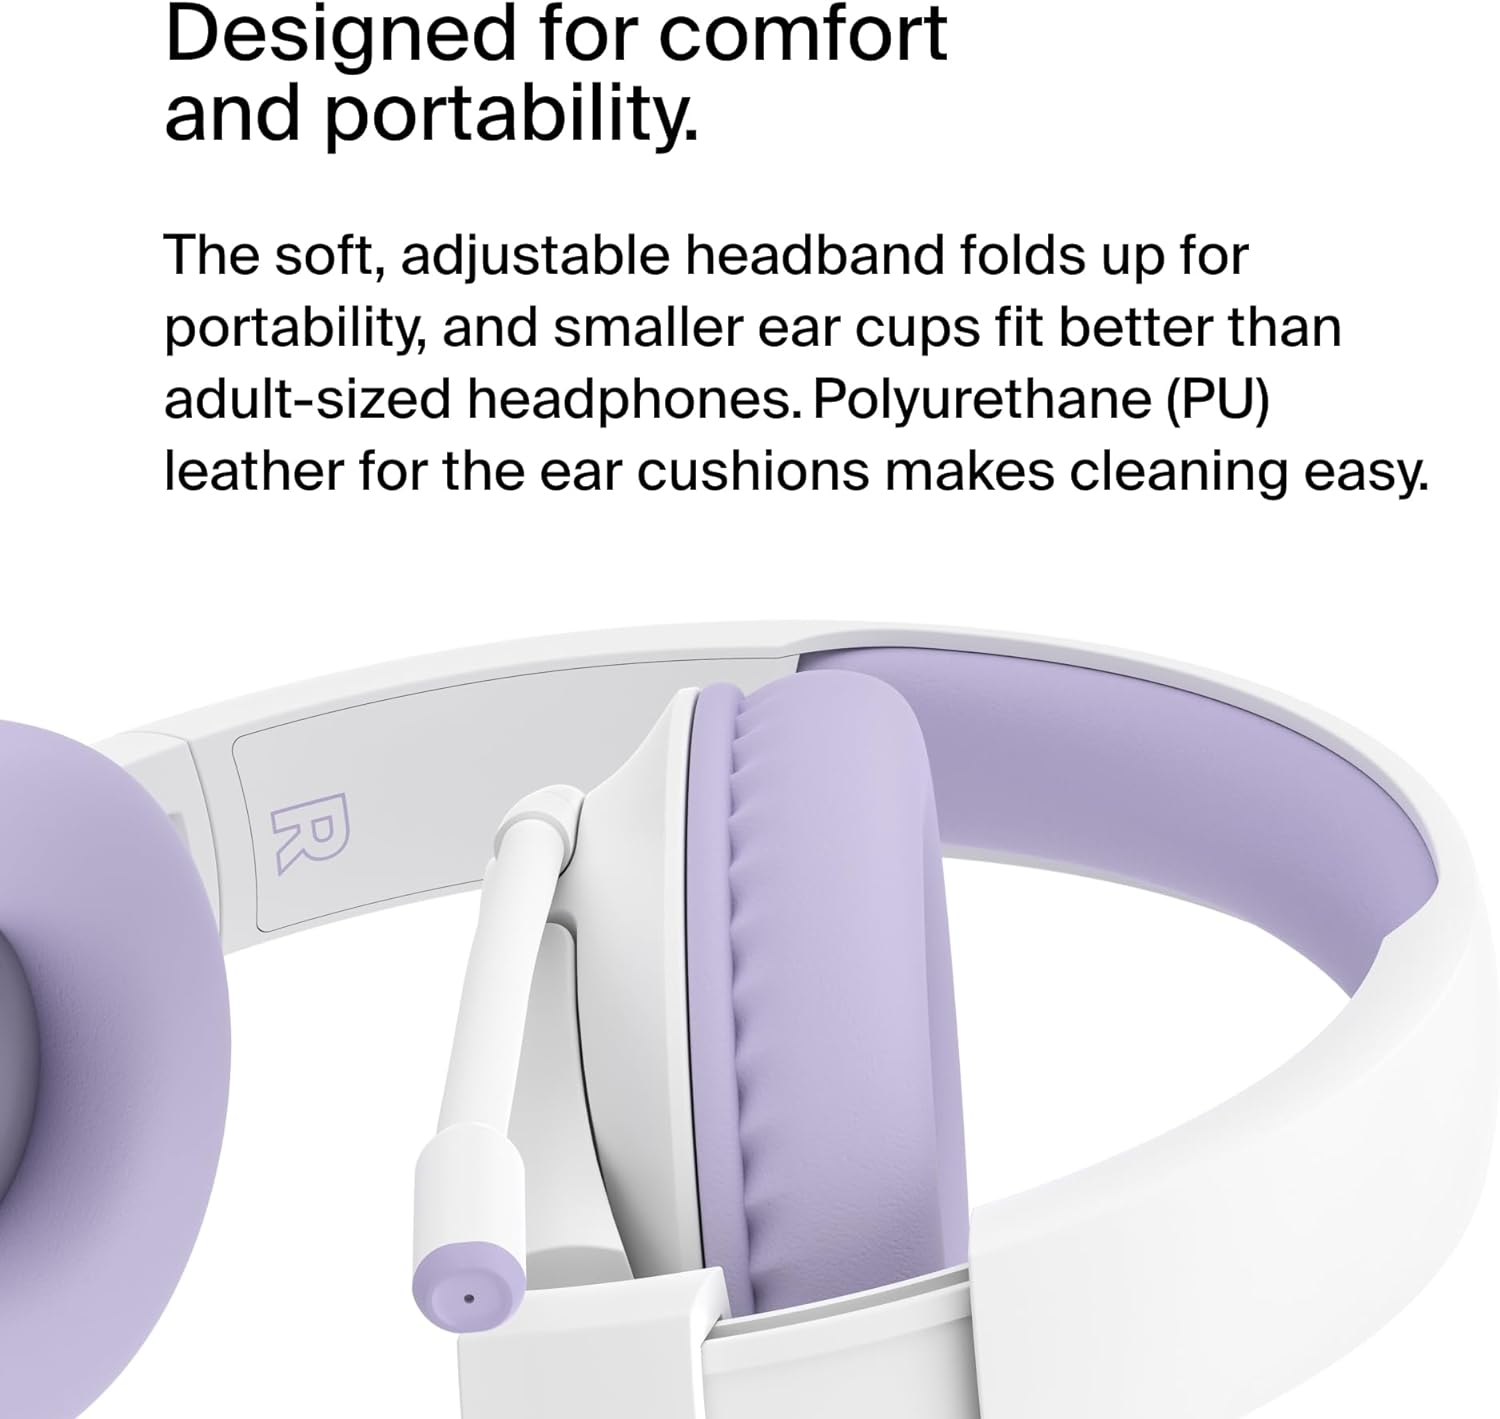 Belkin SoundForm Mini Kids Wireless Headphones with Built in Microphone, On Ear Headsets Girls and Boys For Online Learning, School, Travel Compatible with iPhones, iPads, Galaxy and more - Blue